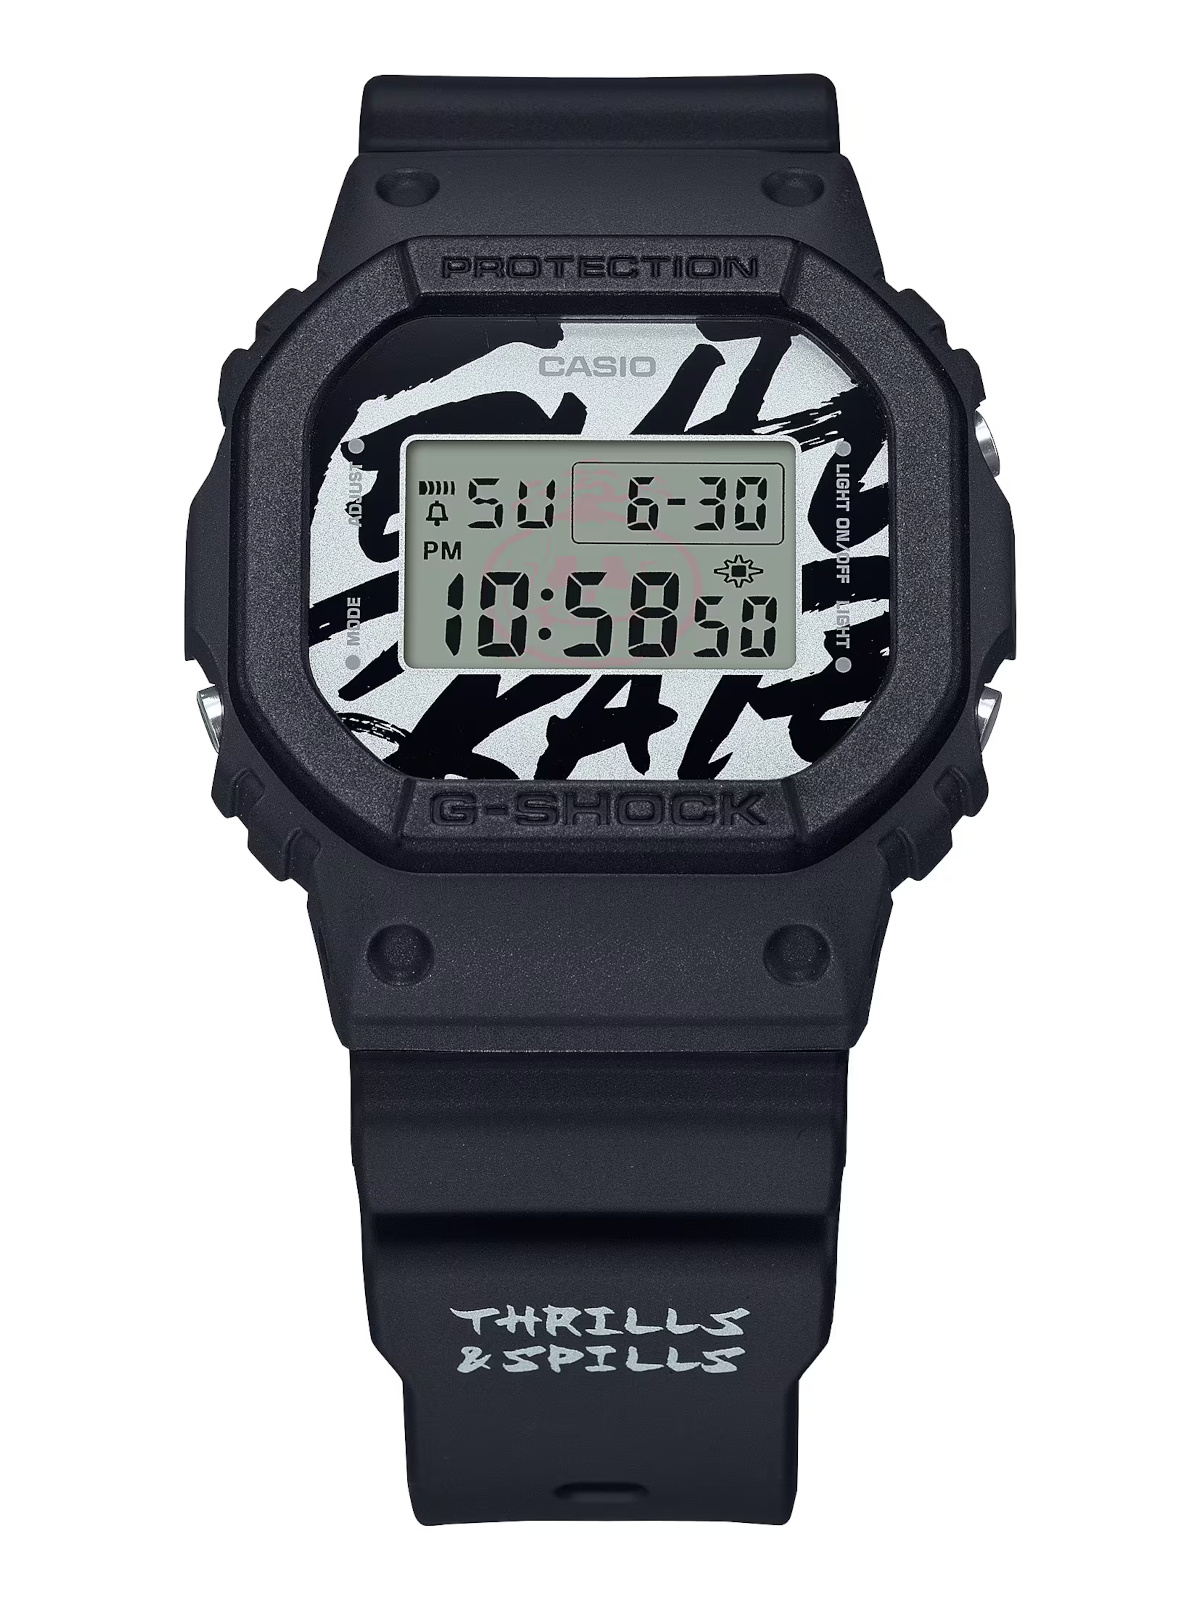 Temple of Skate and G-Shock are releasing the DW-5600TOS23-1 